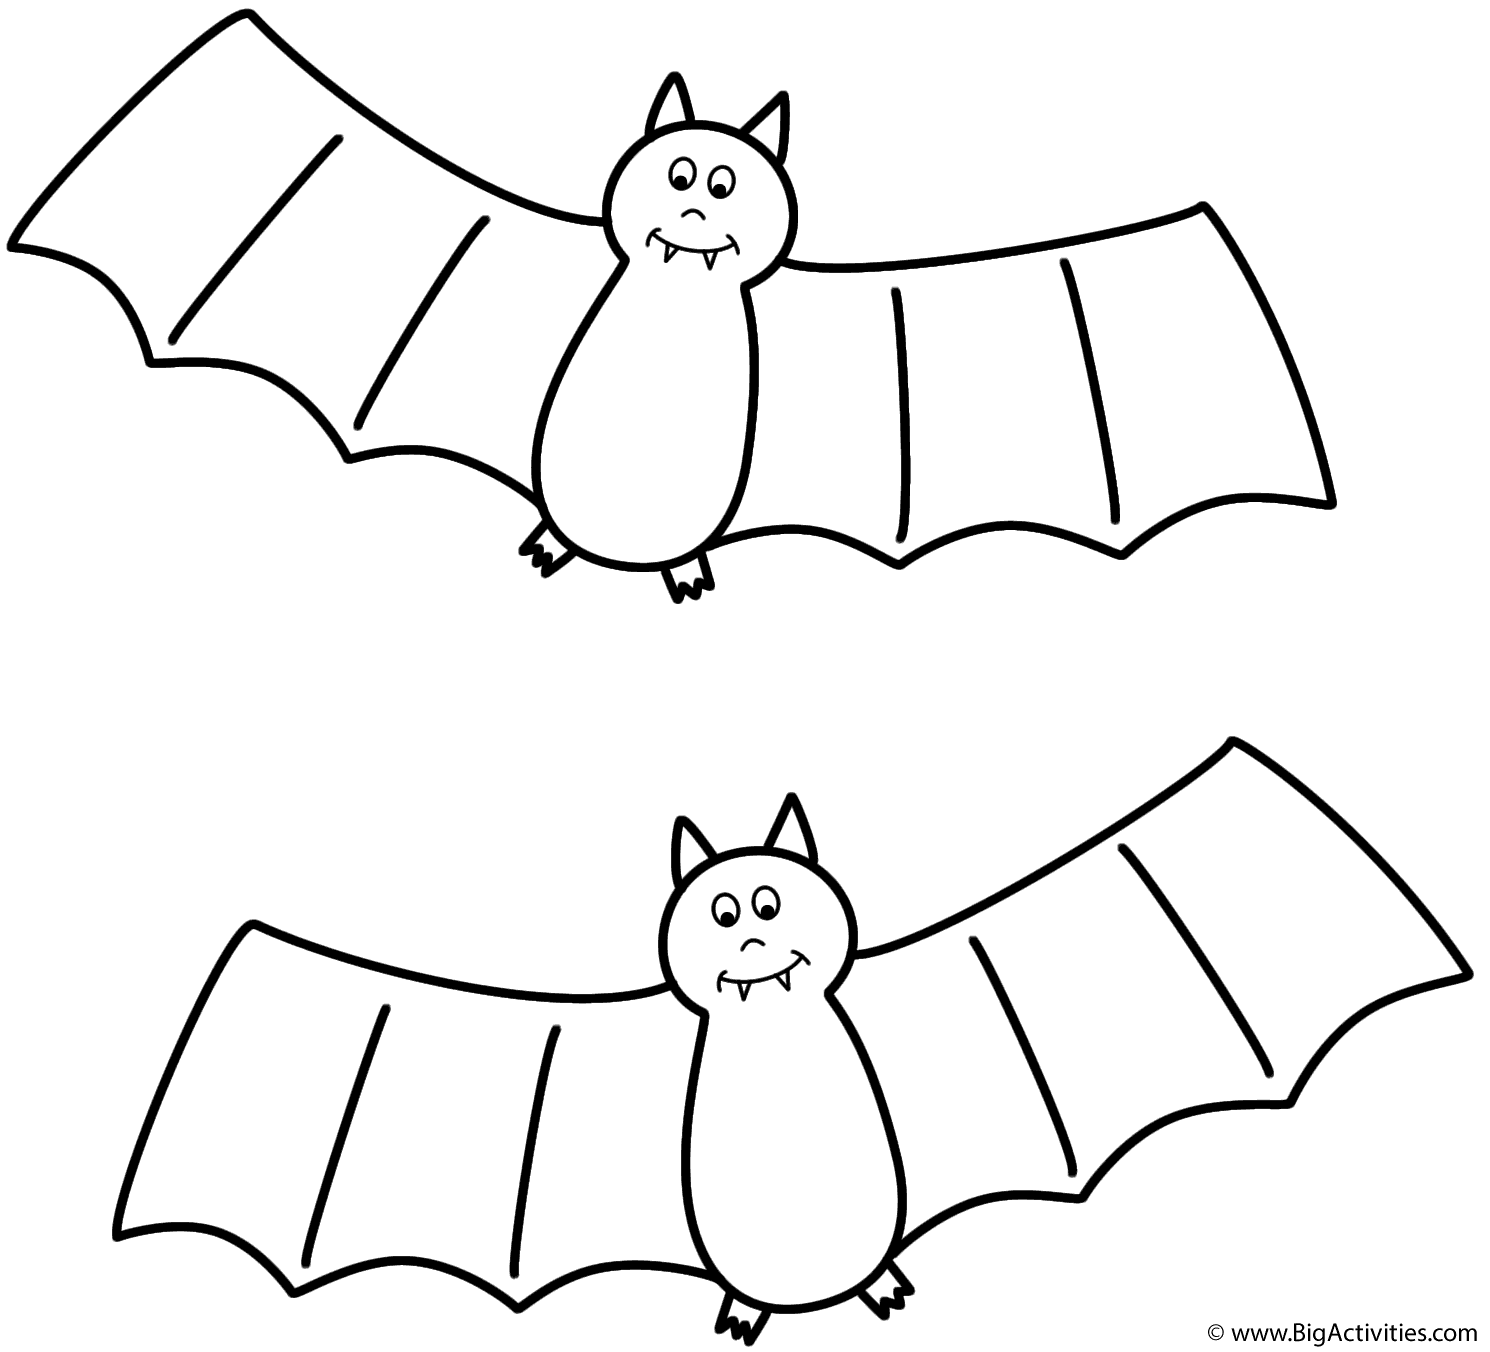 Bats Coloring Page (Halloween)